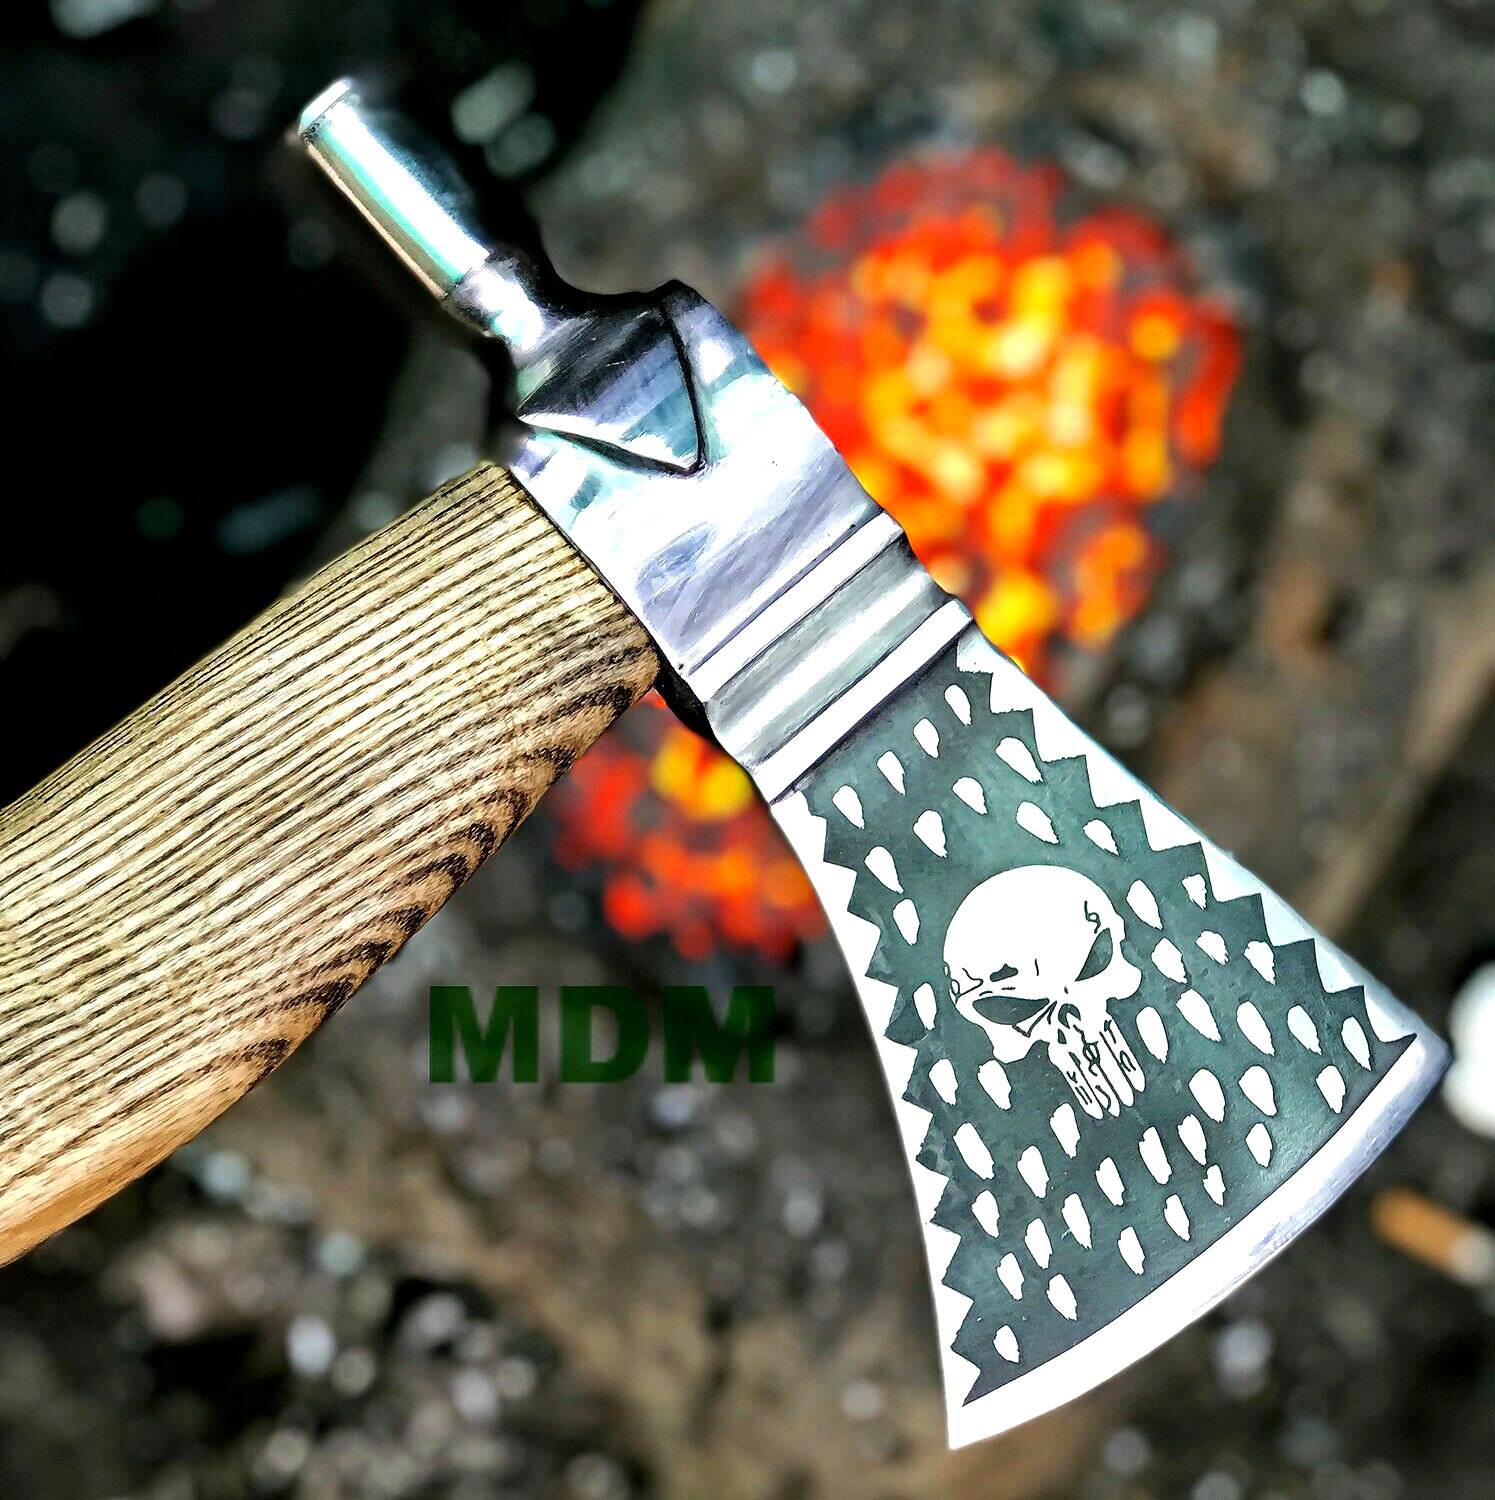 ANTIC Goosewing Bearded Broad Hatchet Axe Head Handmade Forged Rare Skull Etched